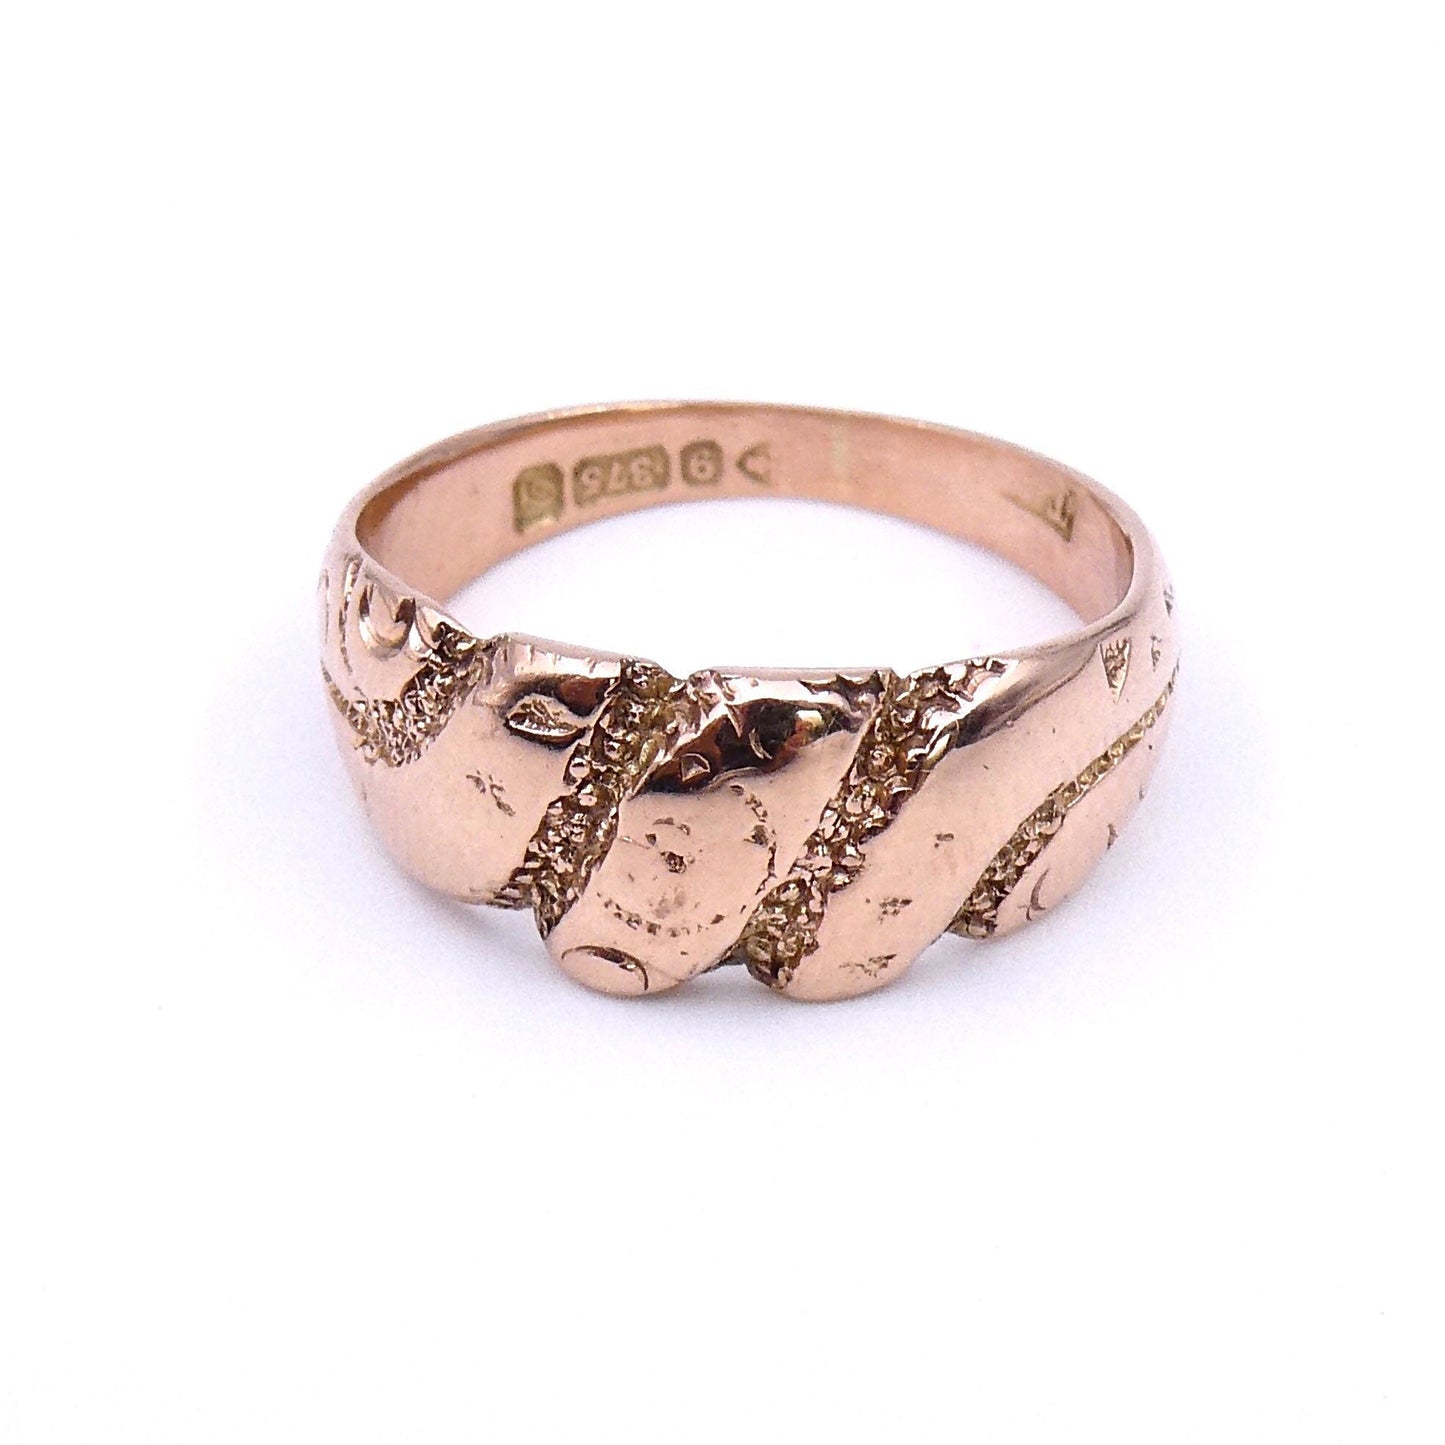 Vintage 9kt engraved rose gold ring with beautiful curved patterning. - Collected